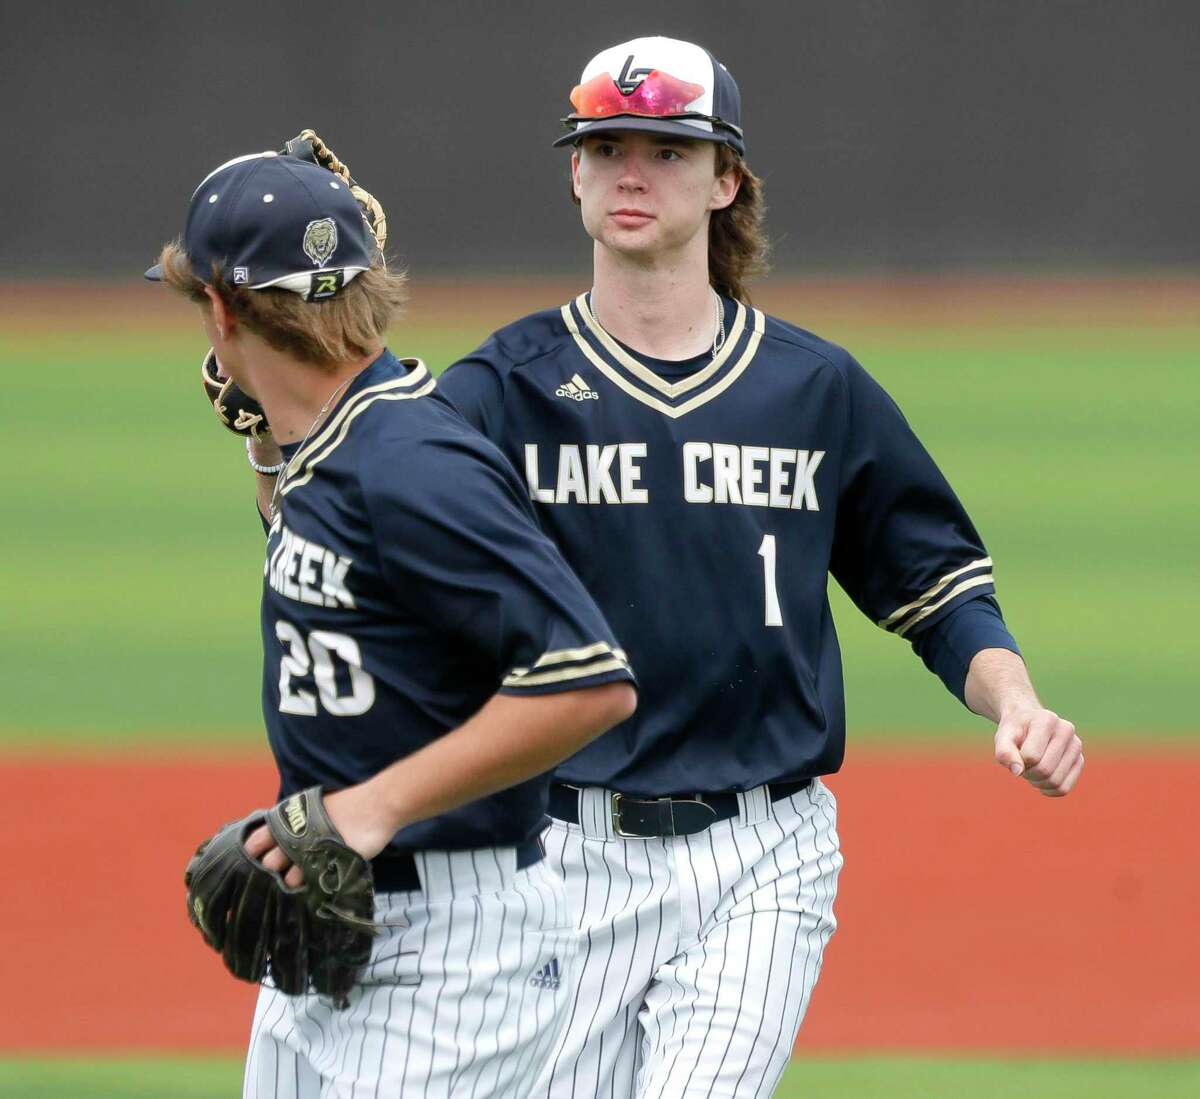 Lake Creek first baseman Shane Sdao (1), shown here earlier this month, struck out 10 in the win over Montgomery Tuesday night.